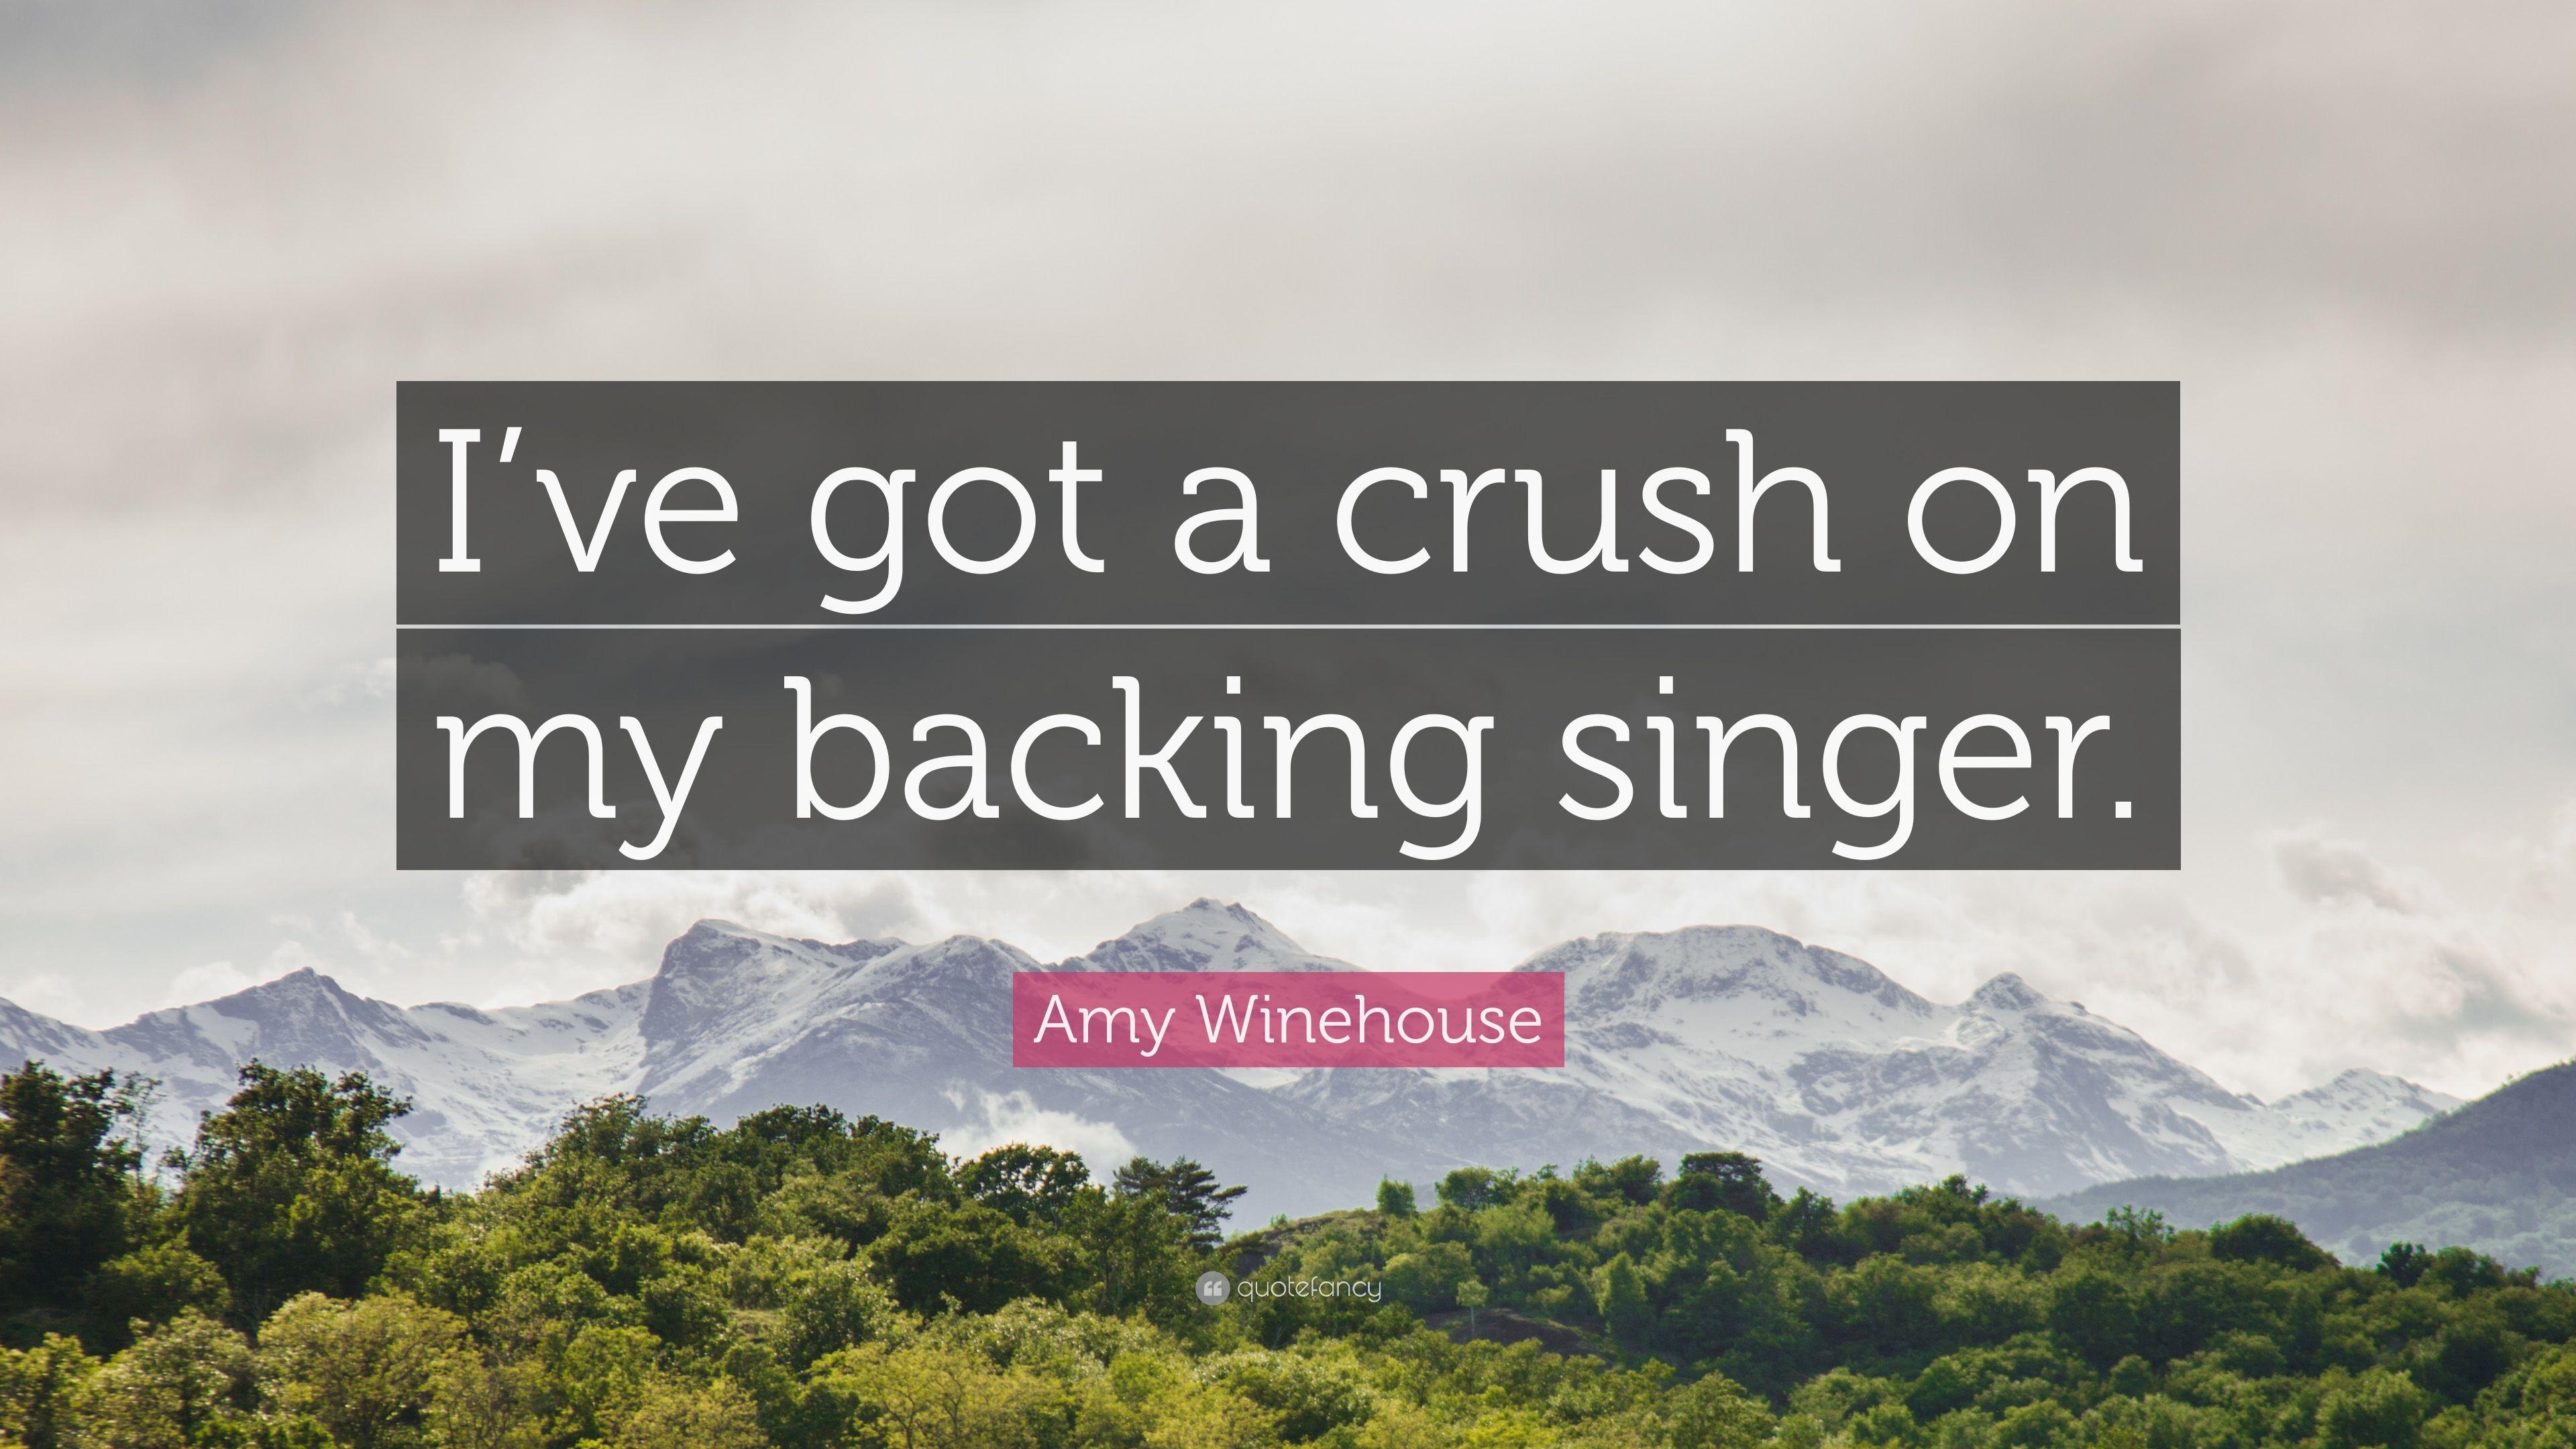 Amy Winehouse Quote: “I've got a crush on my backing singer.” 5